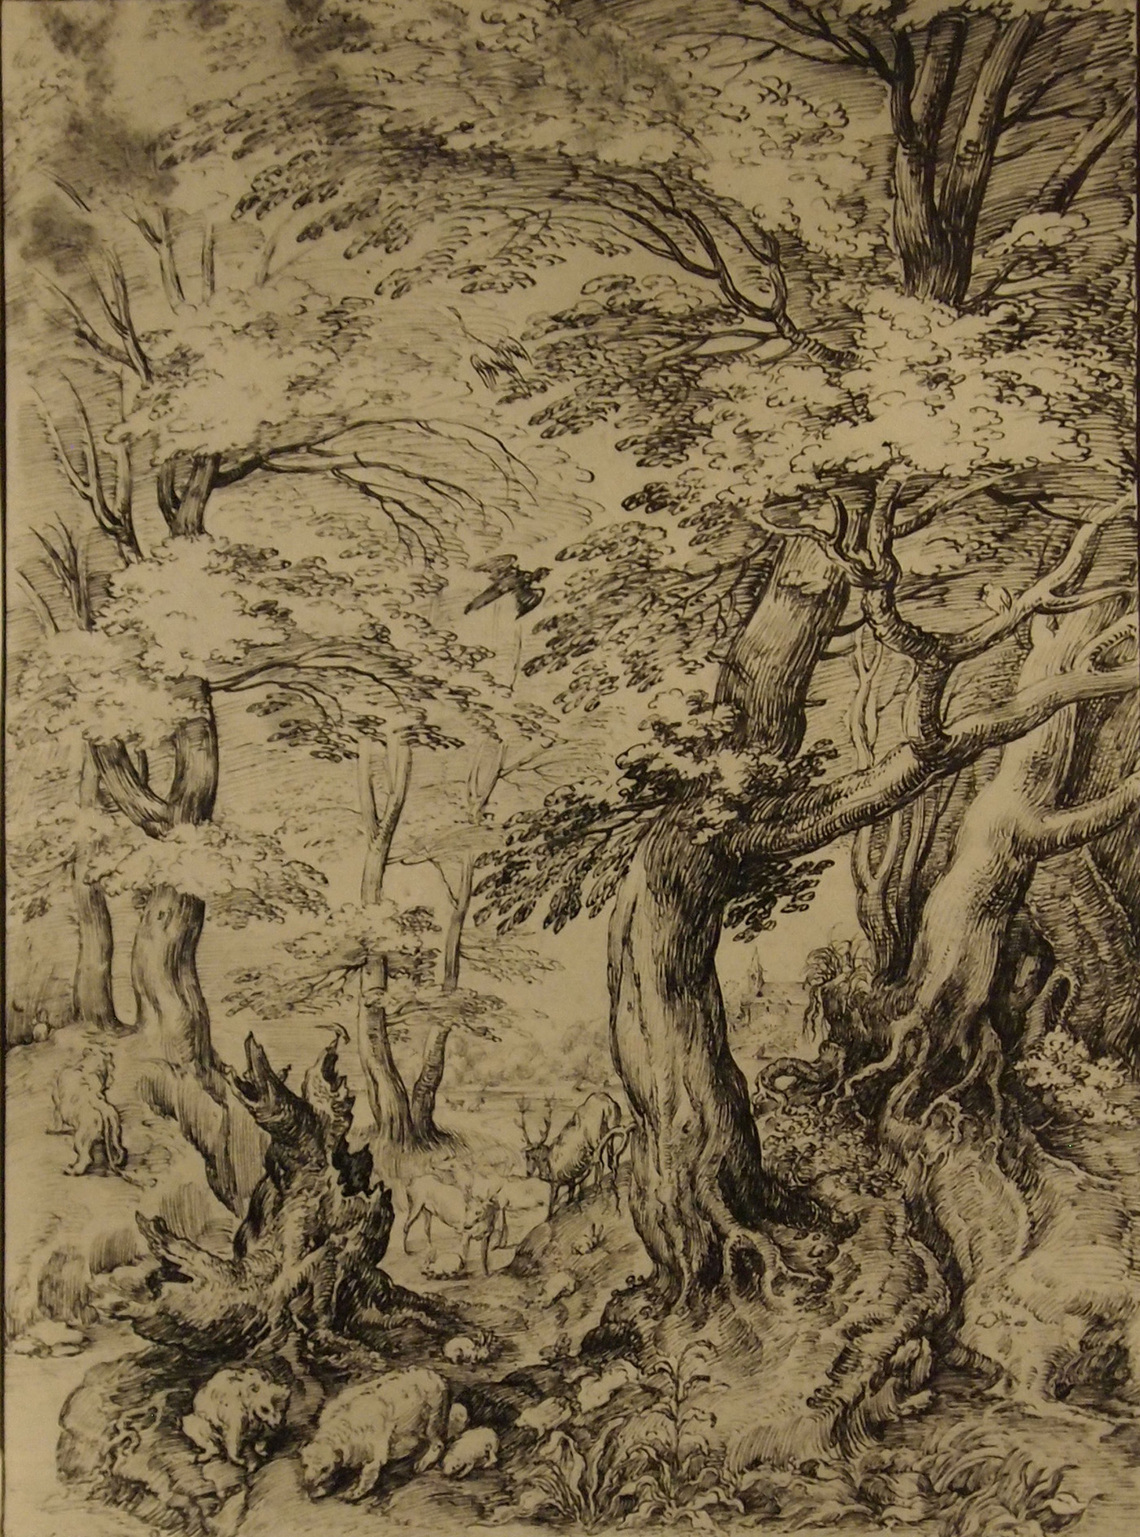 Wooded Landscape with a Family of Bears, Deer, and Other Wild Animals